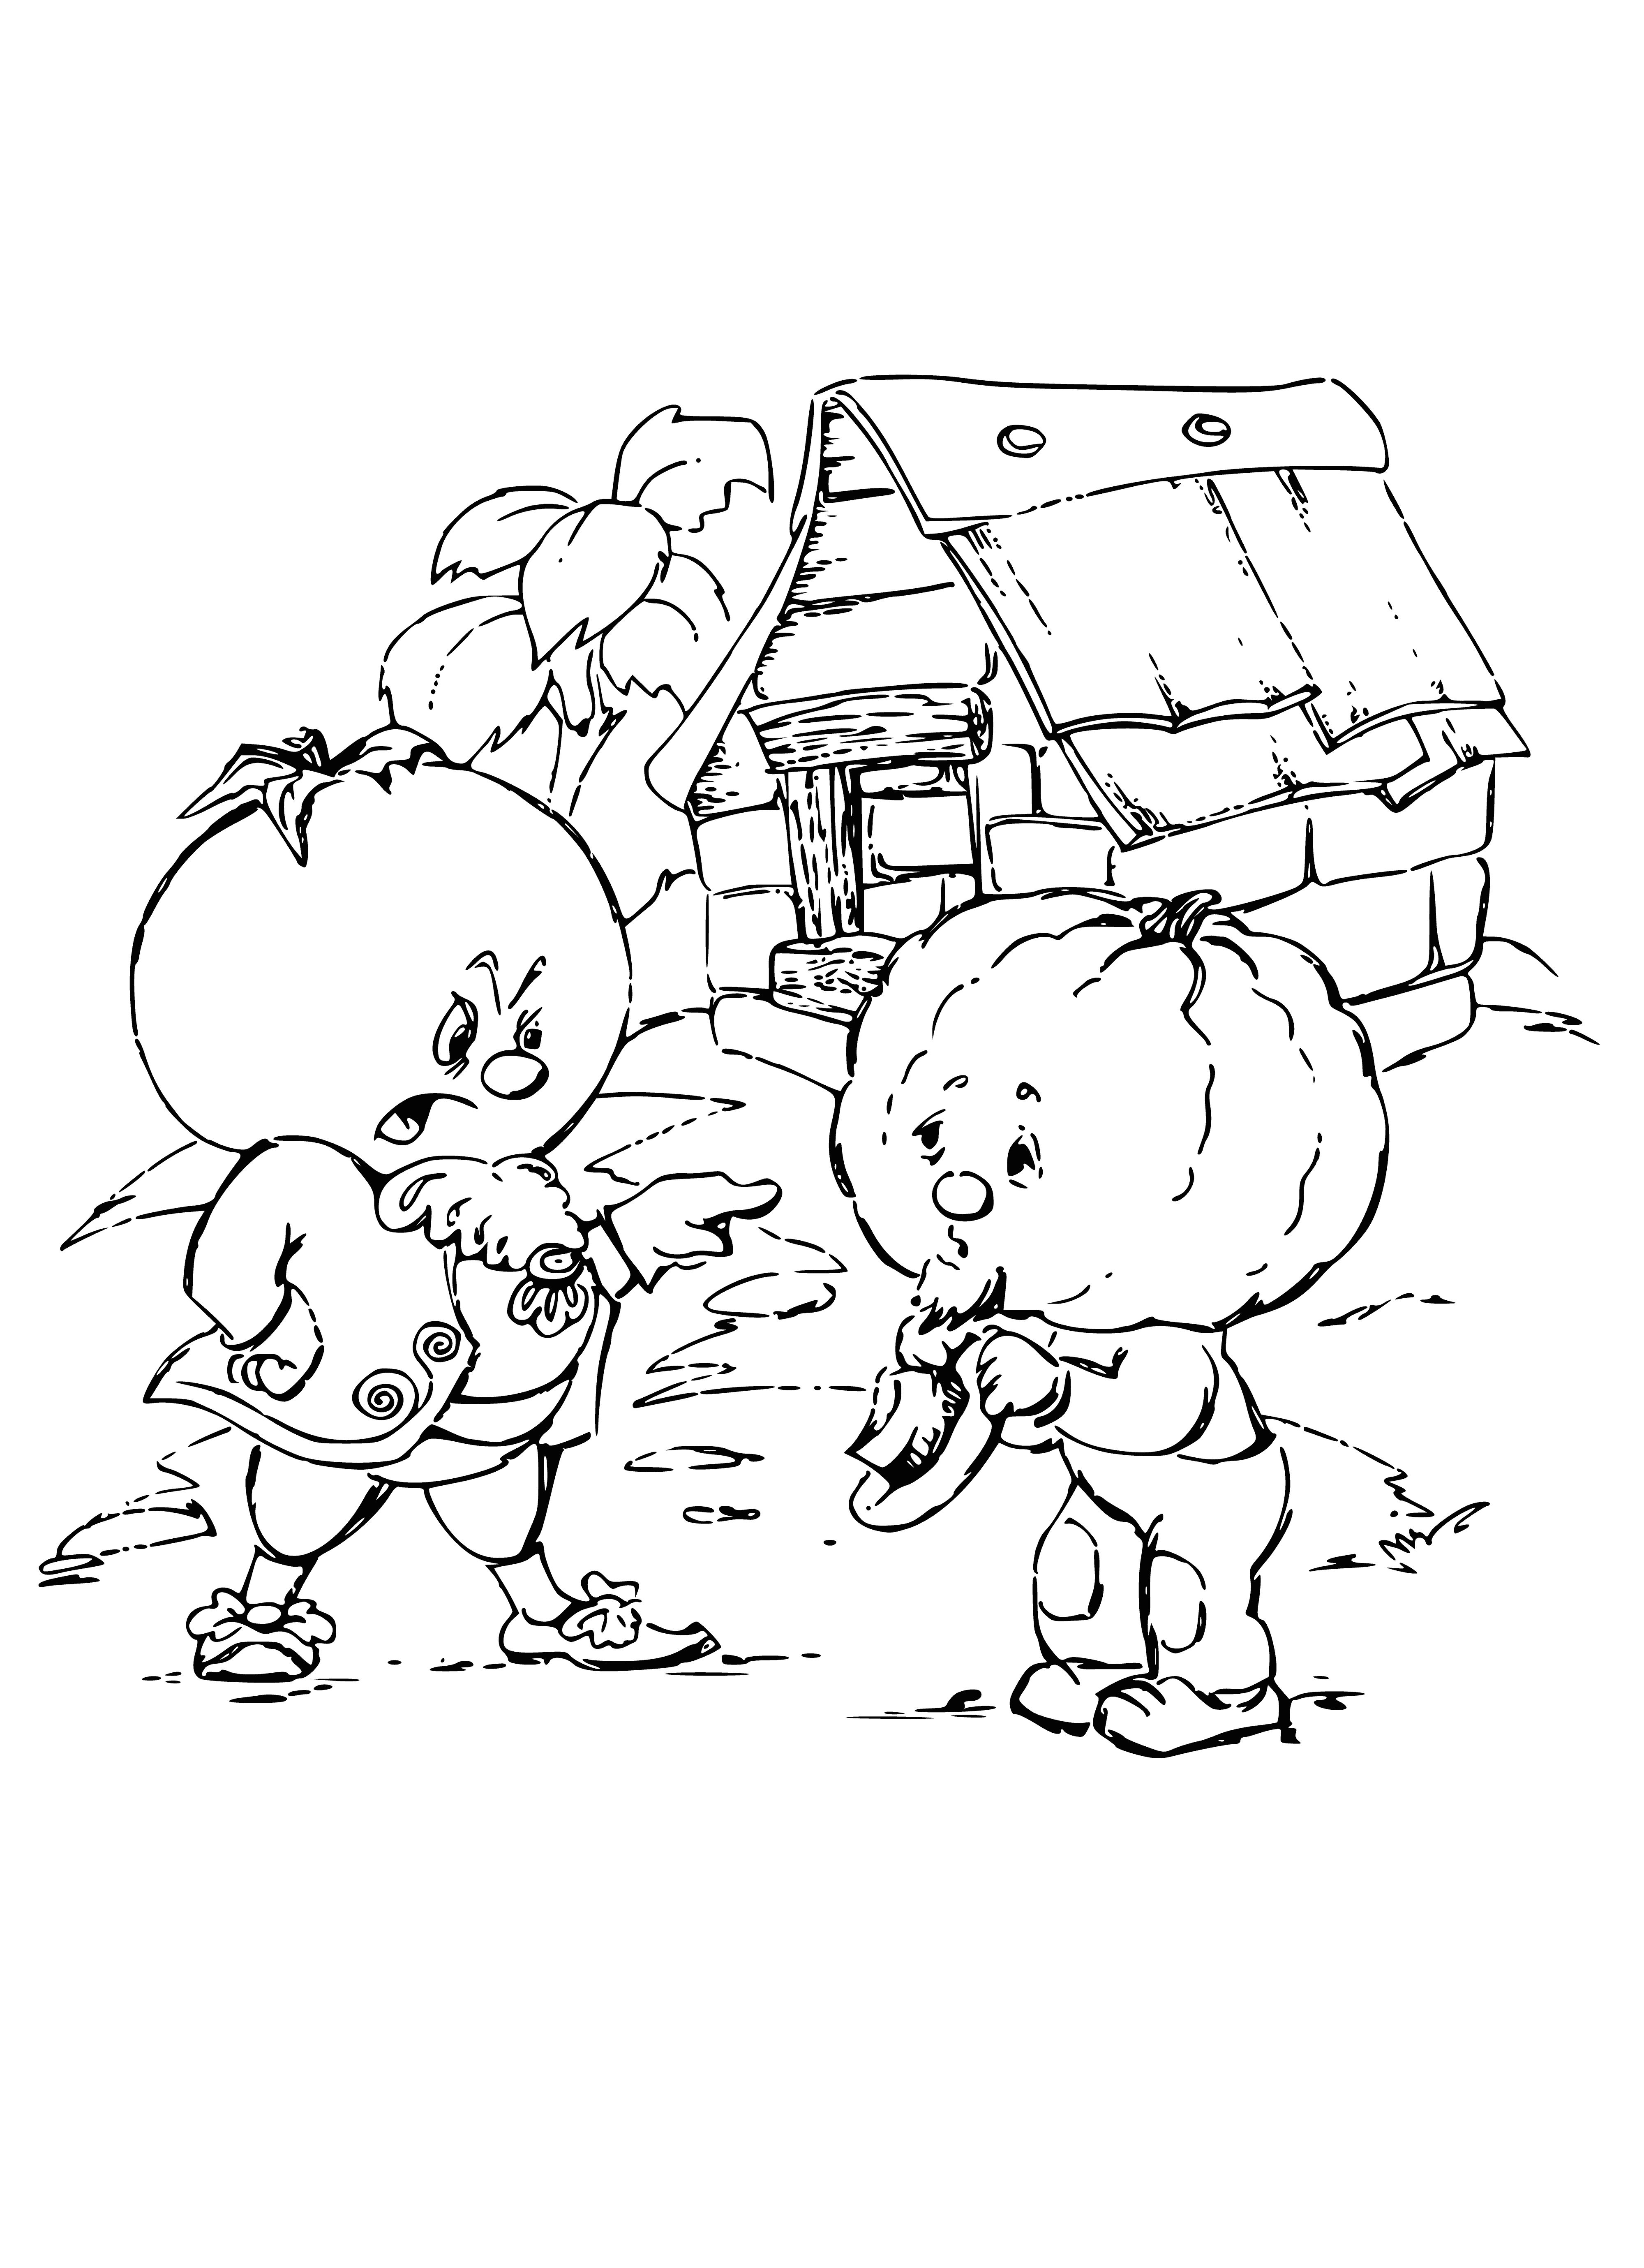 Signor Tomato and Godfather Pumpkin coloring page